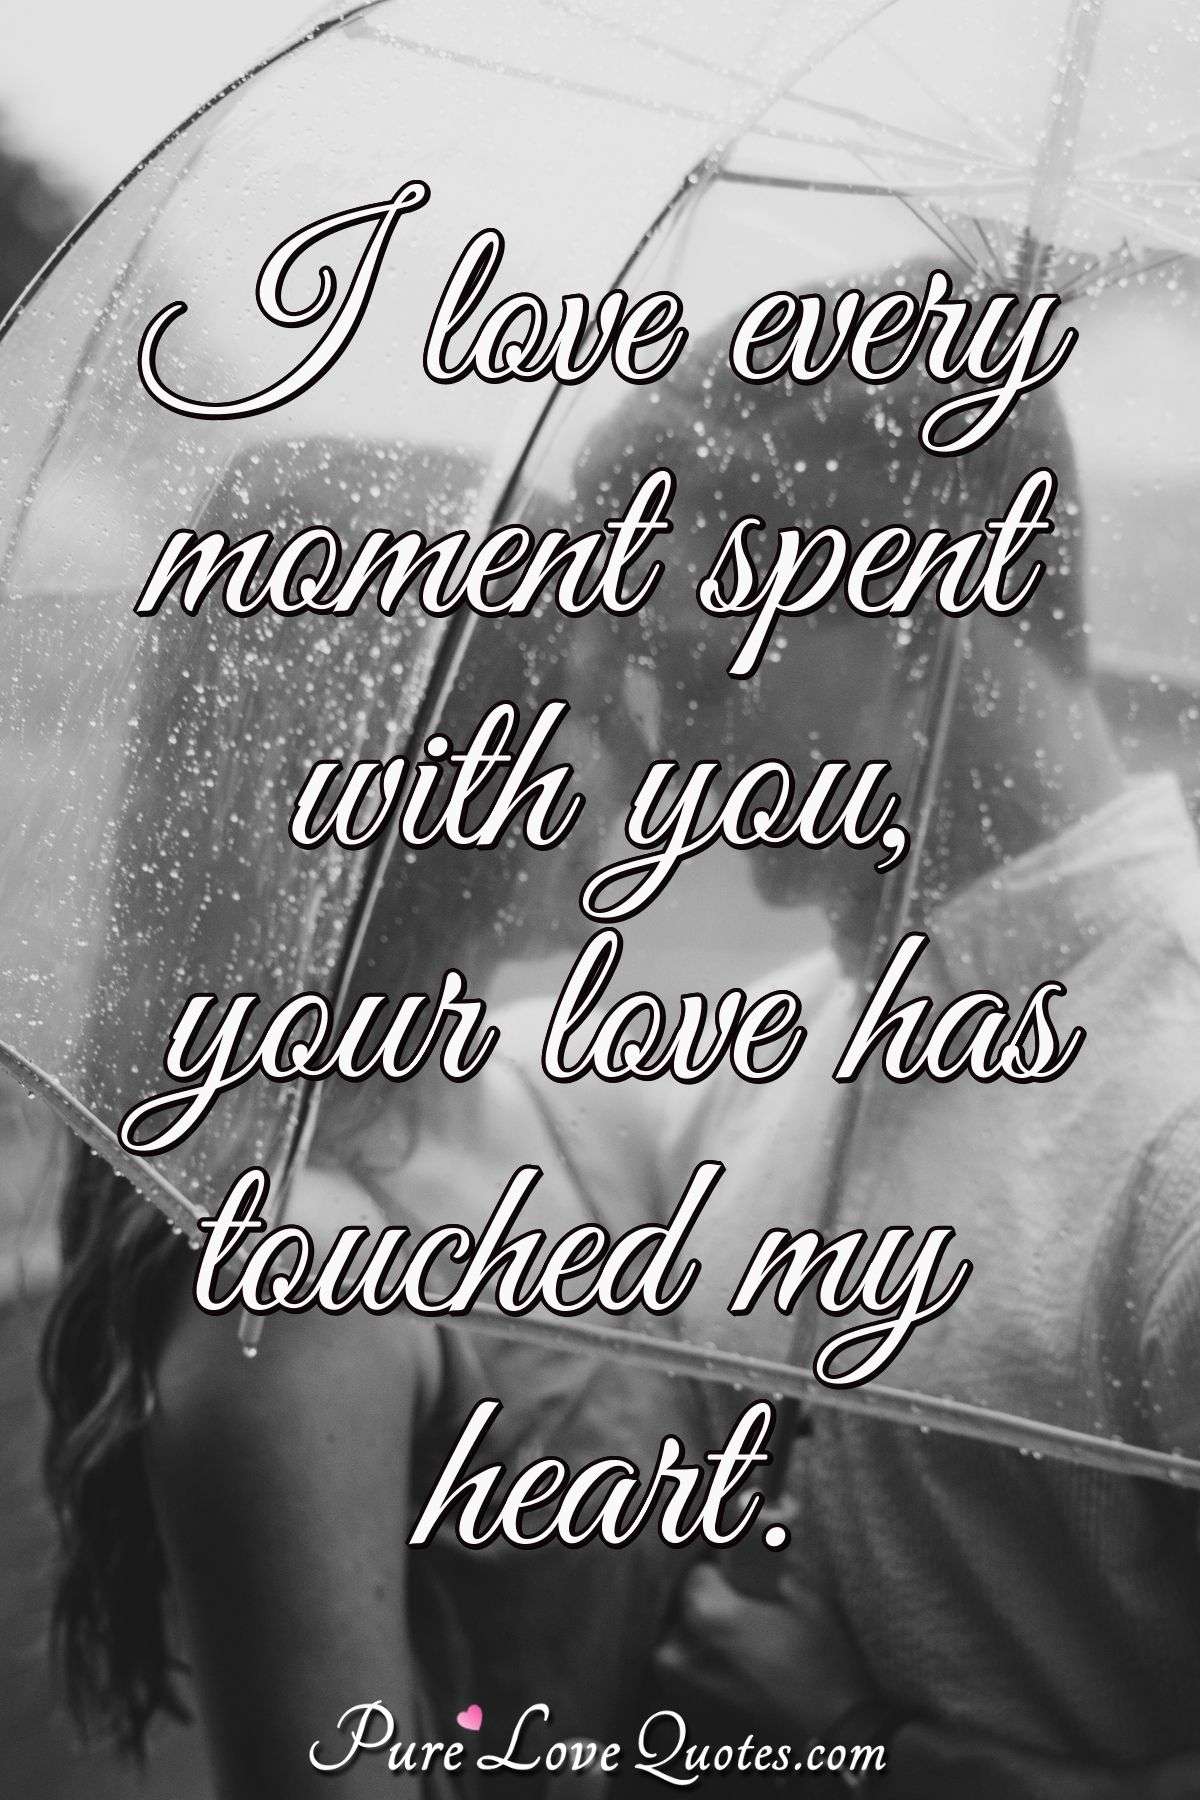 I love every moment spent with you, your love has touched my heart. - PureLoveQuotes.com